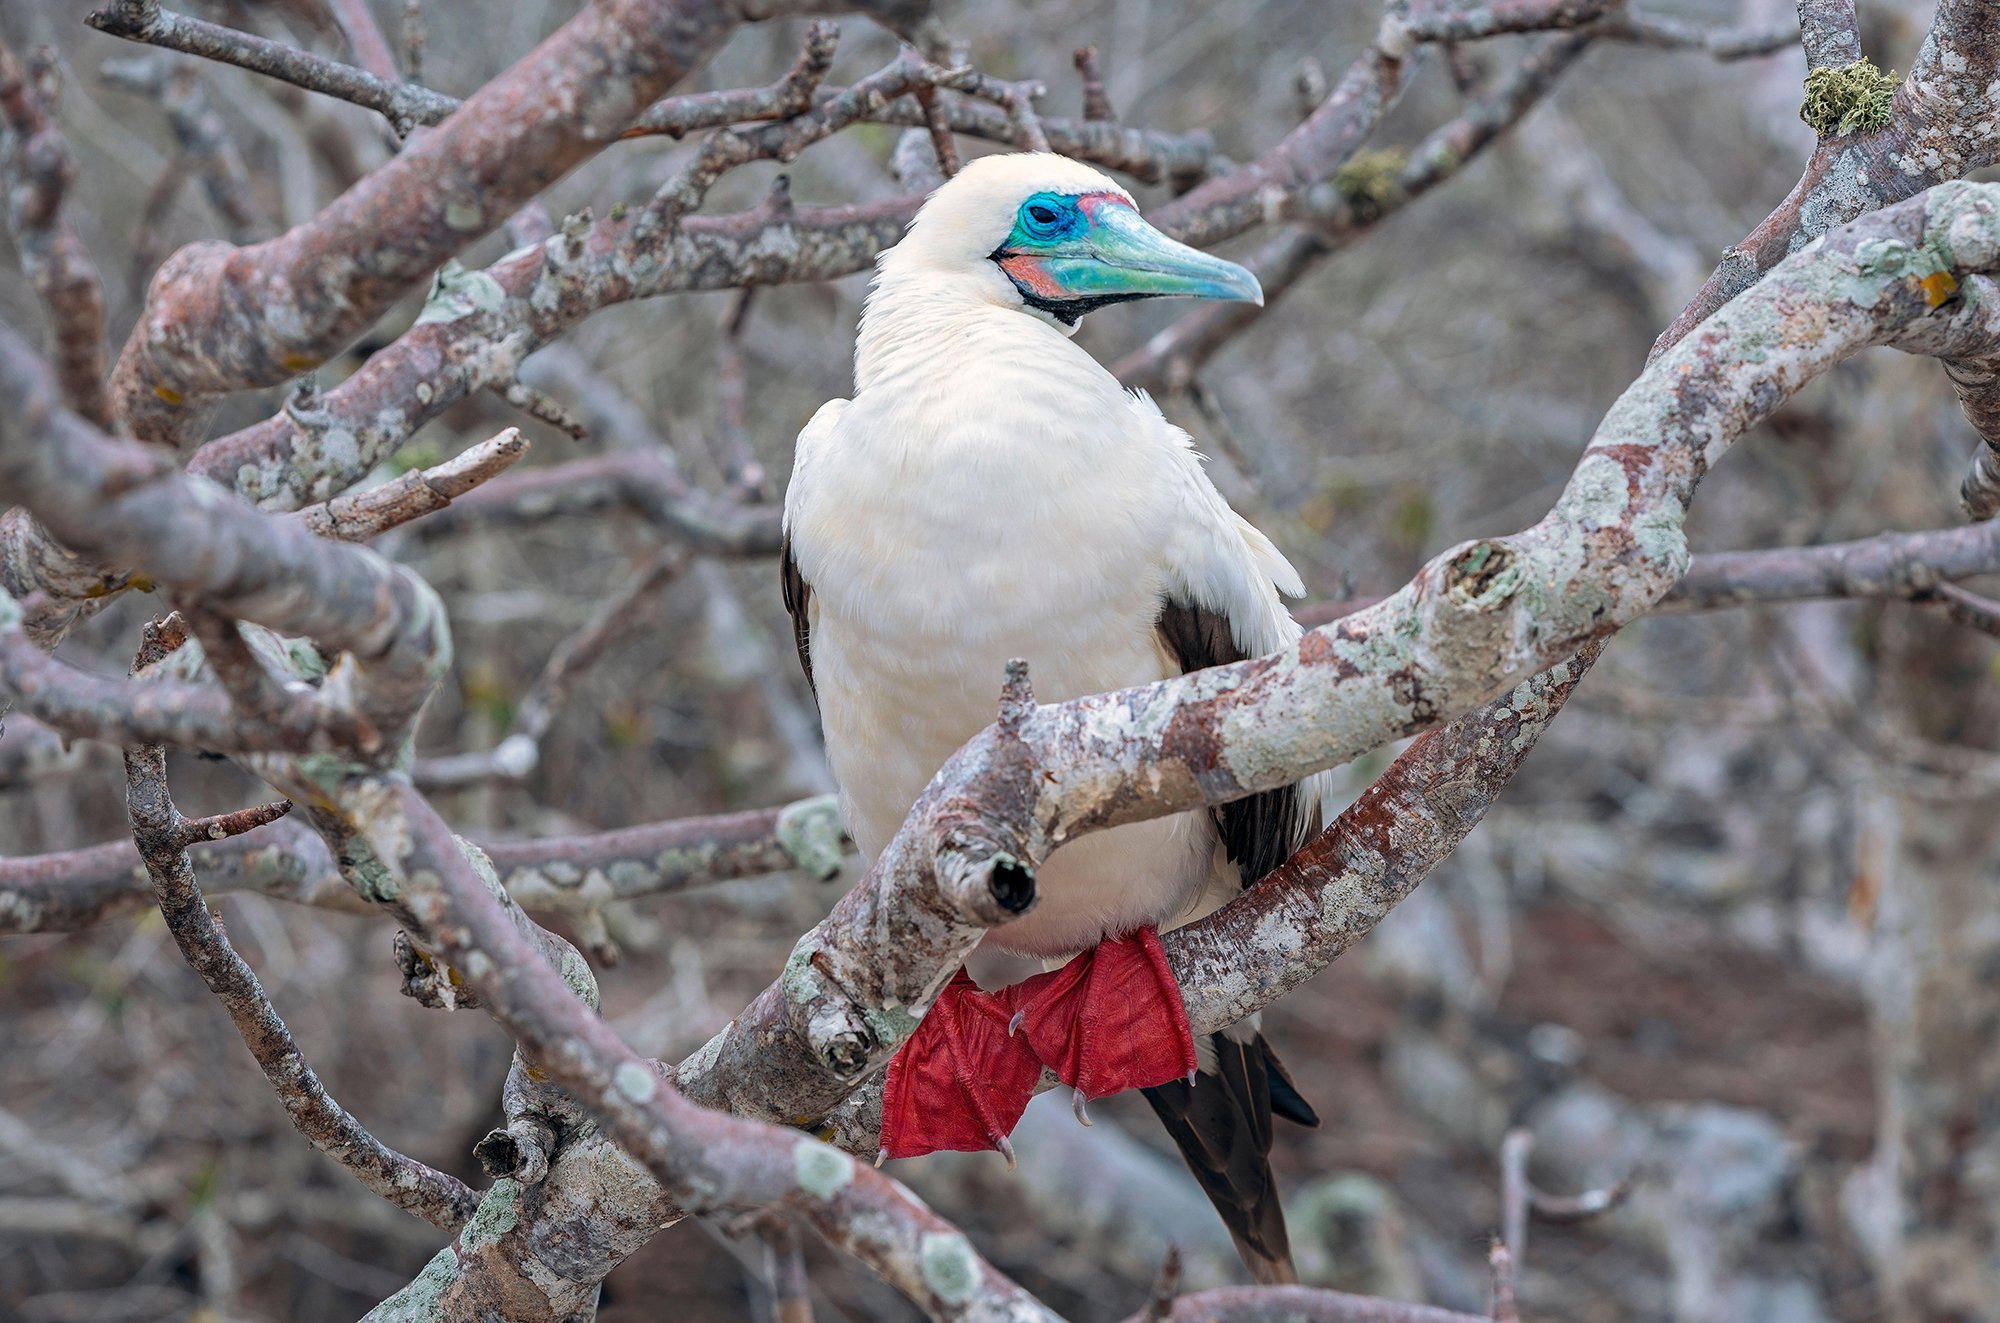 The red-footed booby has a rainbow Paddle Pop beak - Australian Geographic